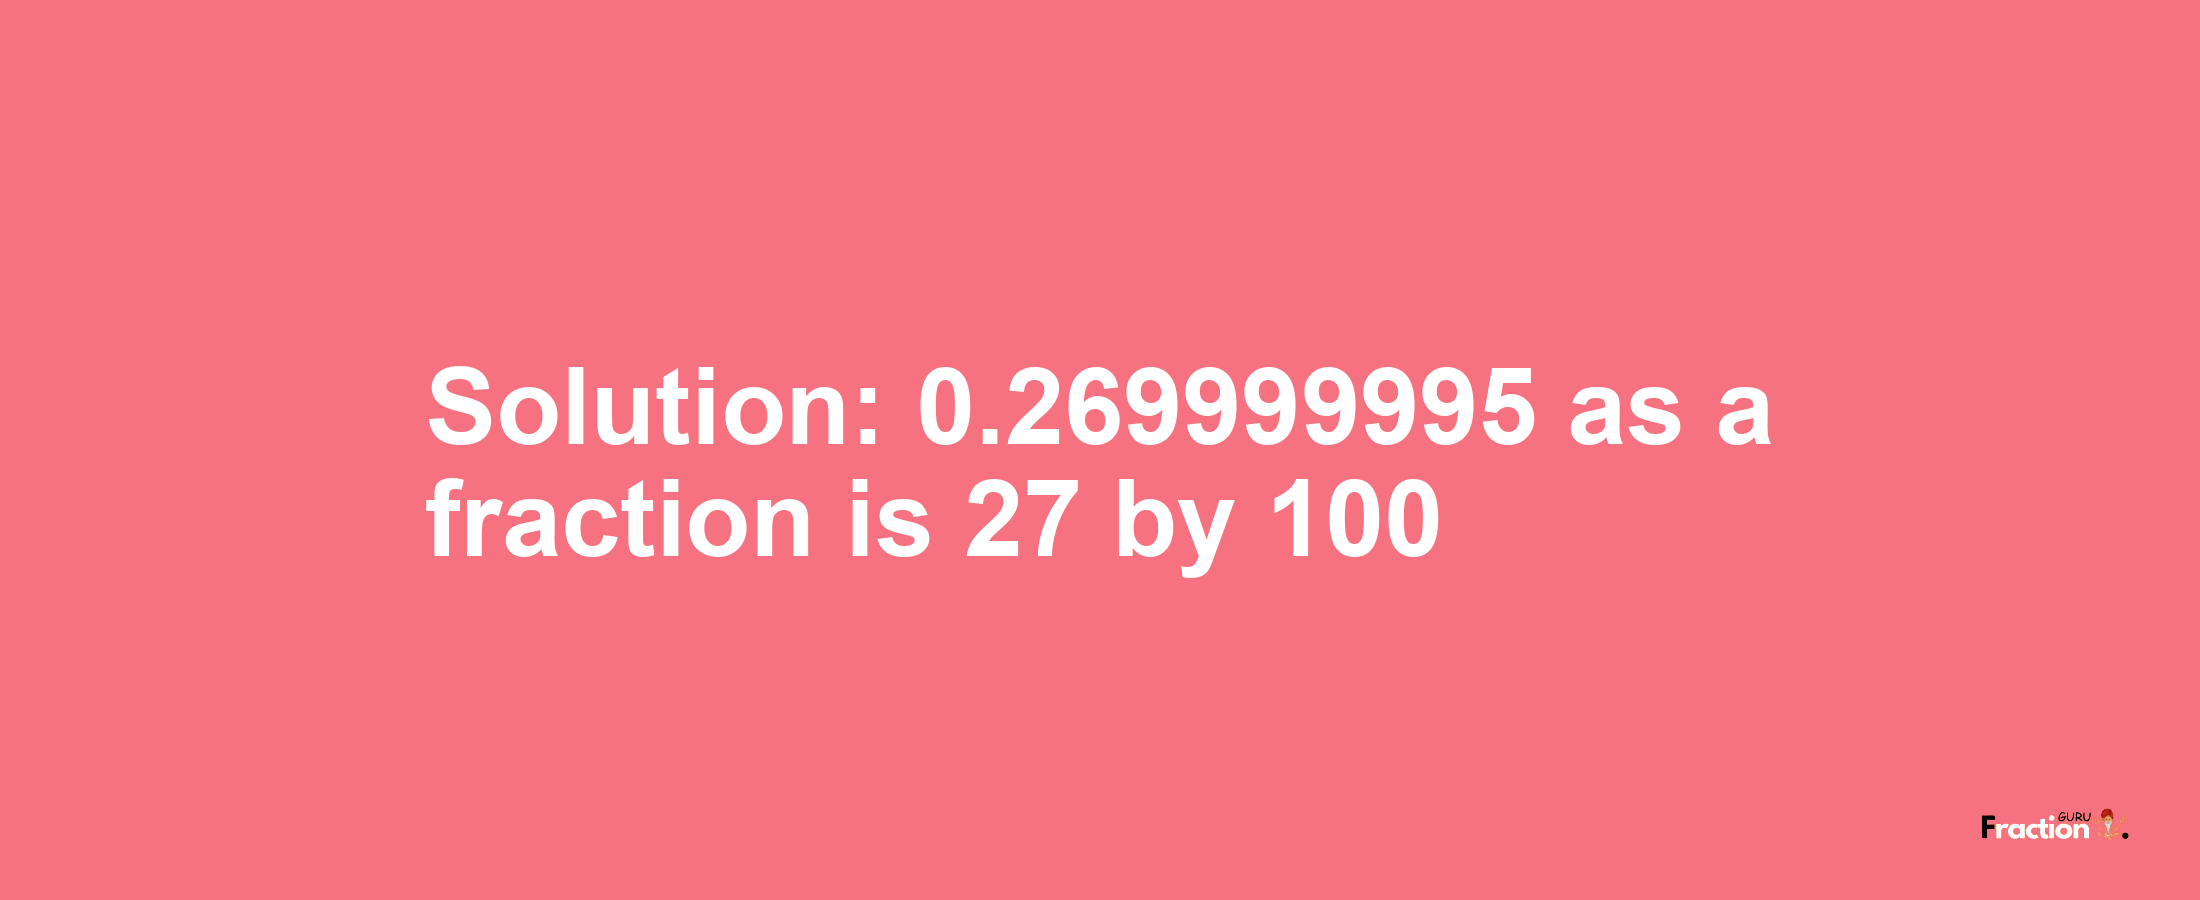 Solution:0.269999995 as a fraction is 27/100